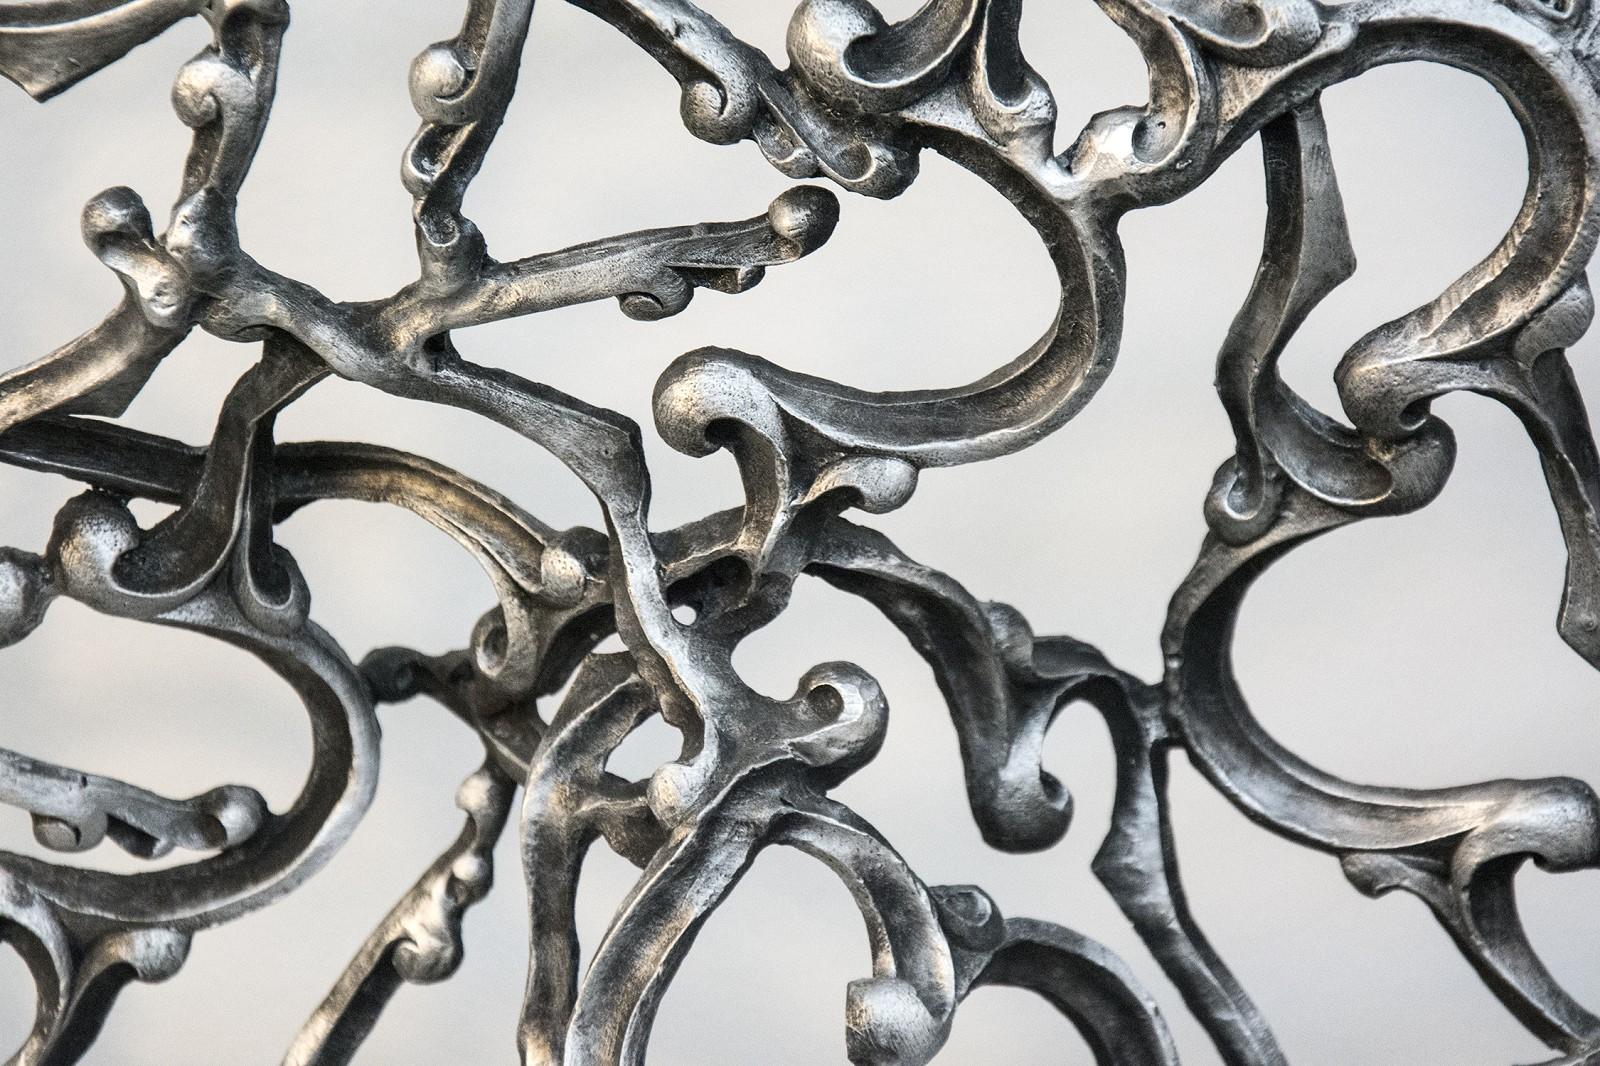 Snakes & Letters - repurposed metal, gothic, aluminum figurative wall sculpture - Contemporary Sculpture by Dale Dunning